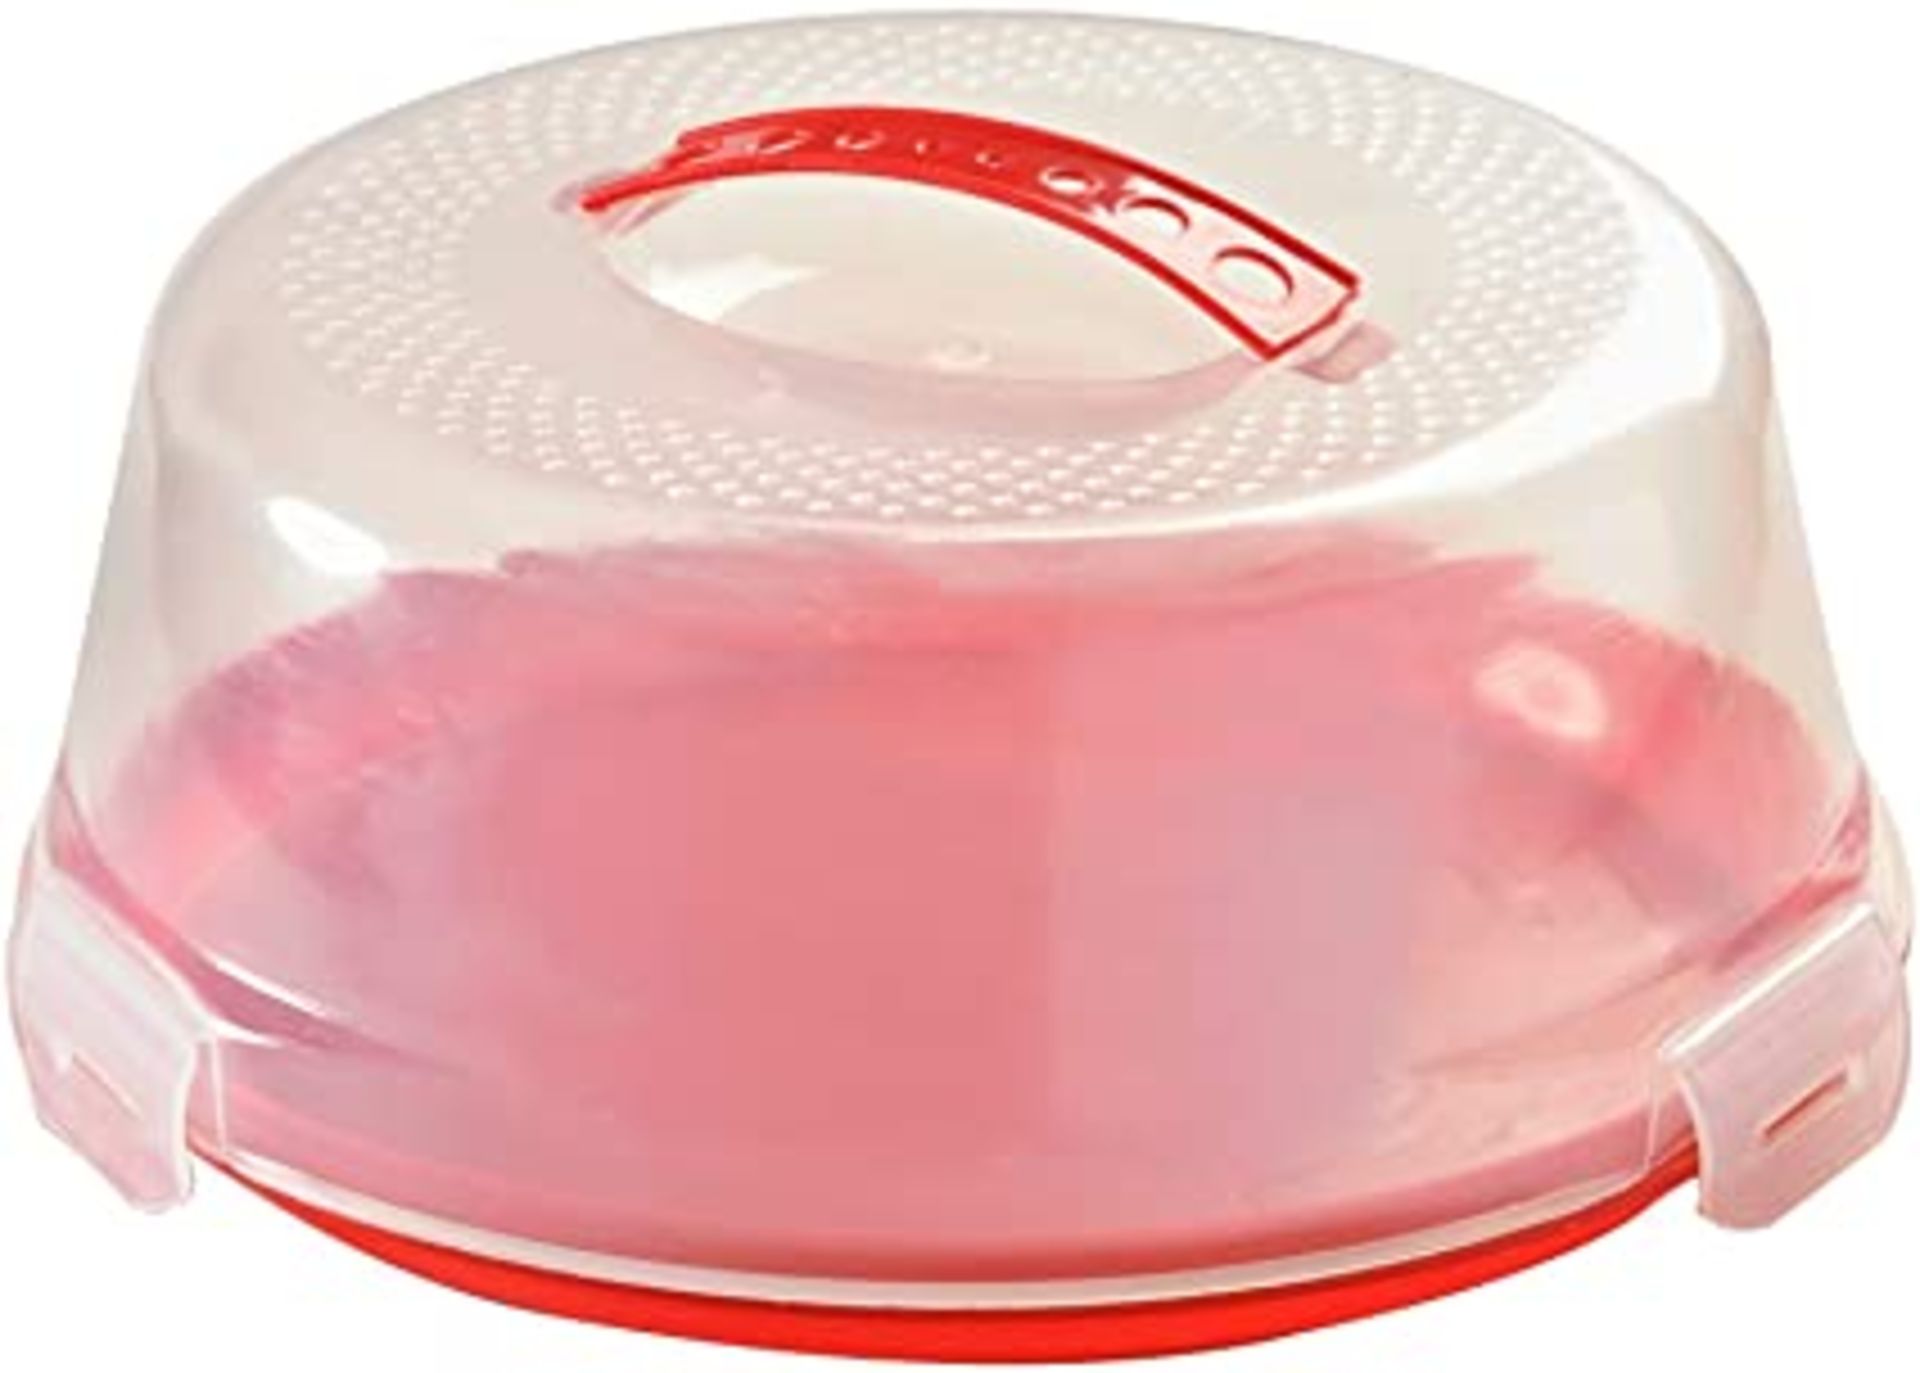 RRP - £9.00 Mason Cash 2007.968 Round 24 cm Cake Caddy with Lid Carry Handle and Easy Locking System